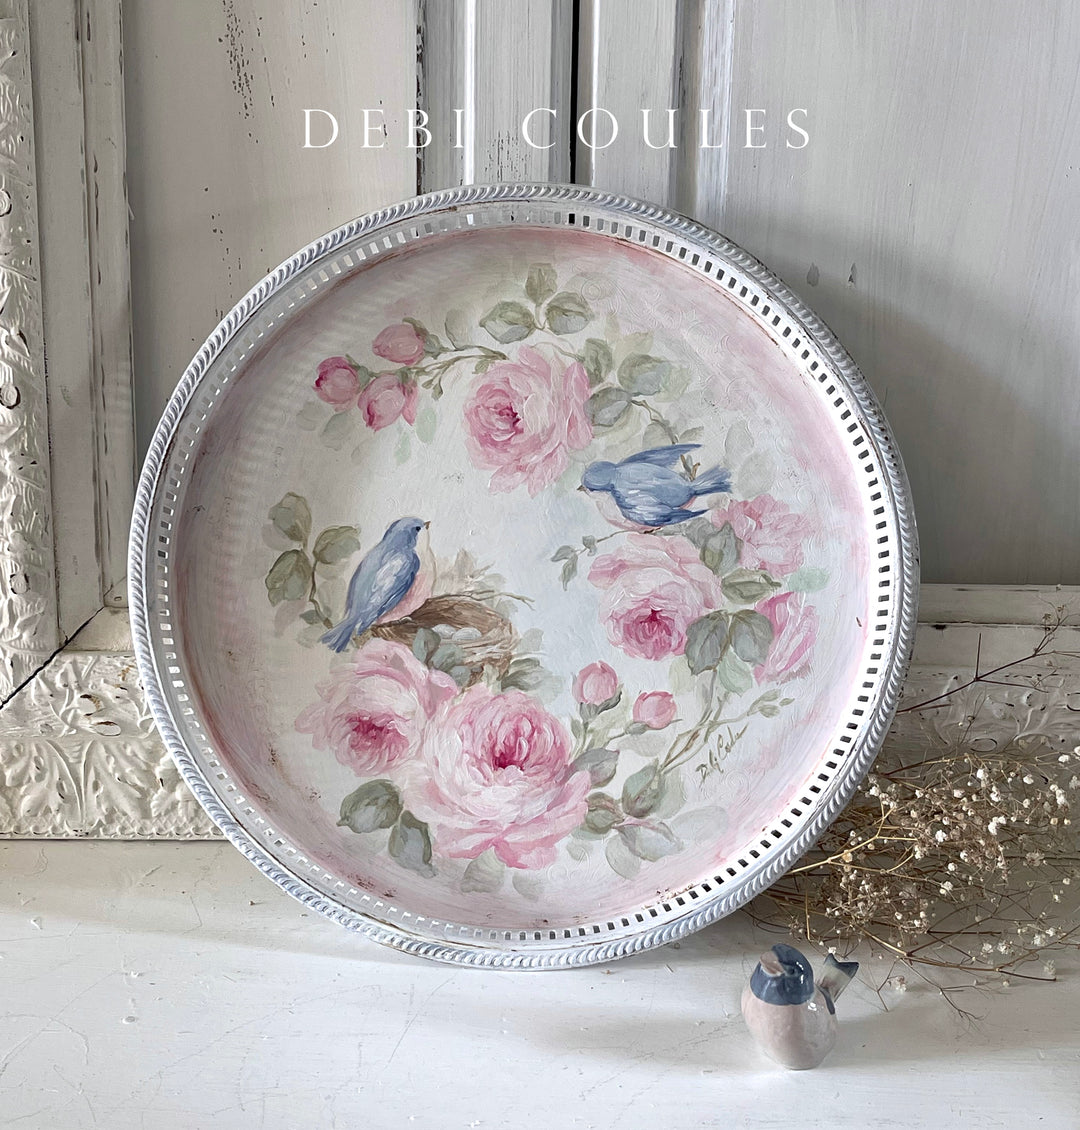 Shabby Chic Vintage Large Bluebird Roses And Nest Vintage Tray Original by Debi Coules